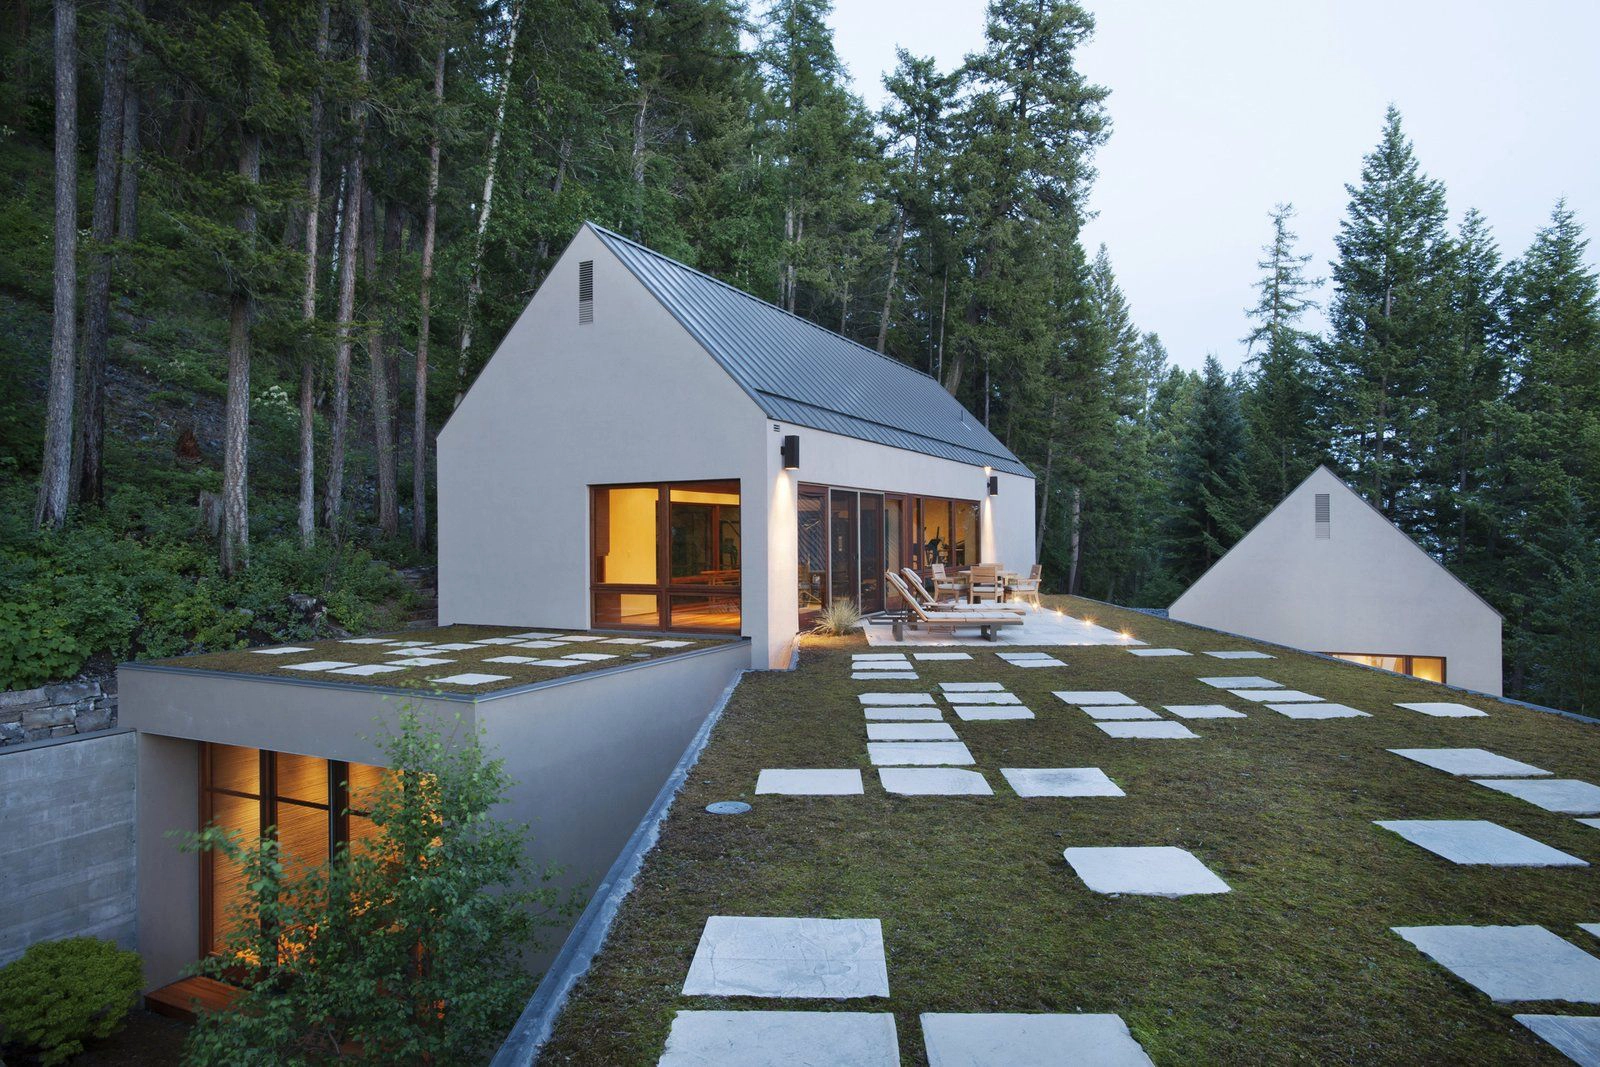 Whitefish Poolhouse & Gallery